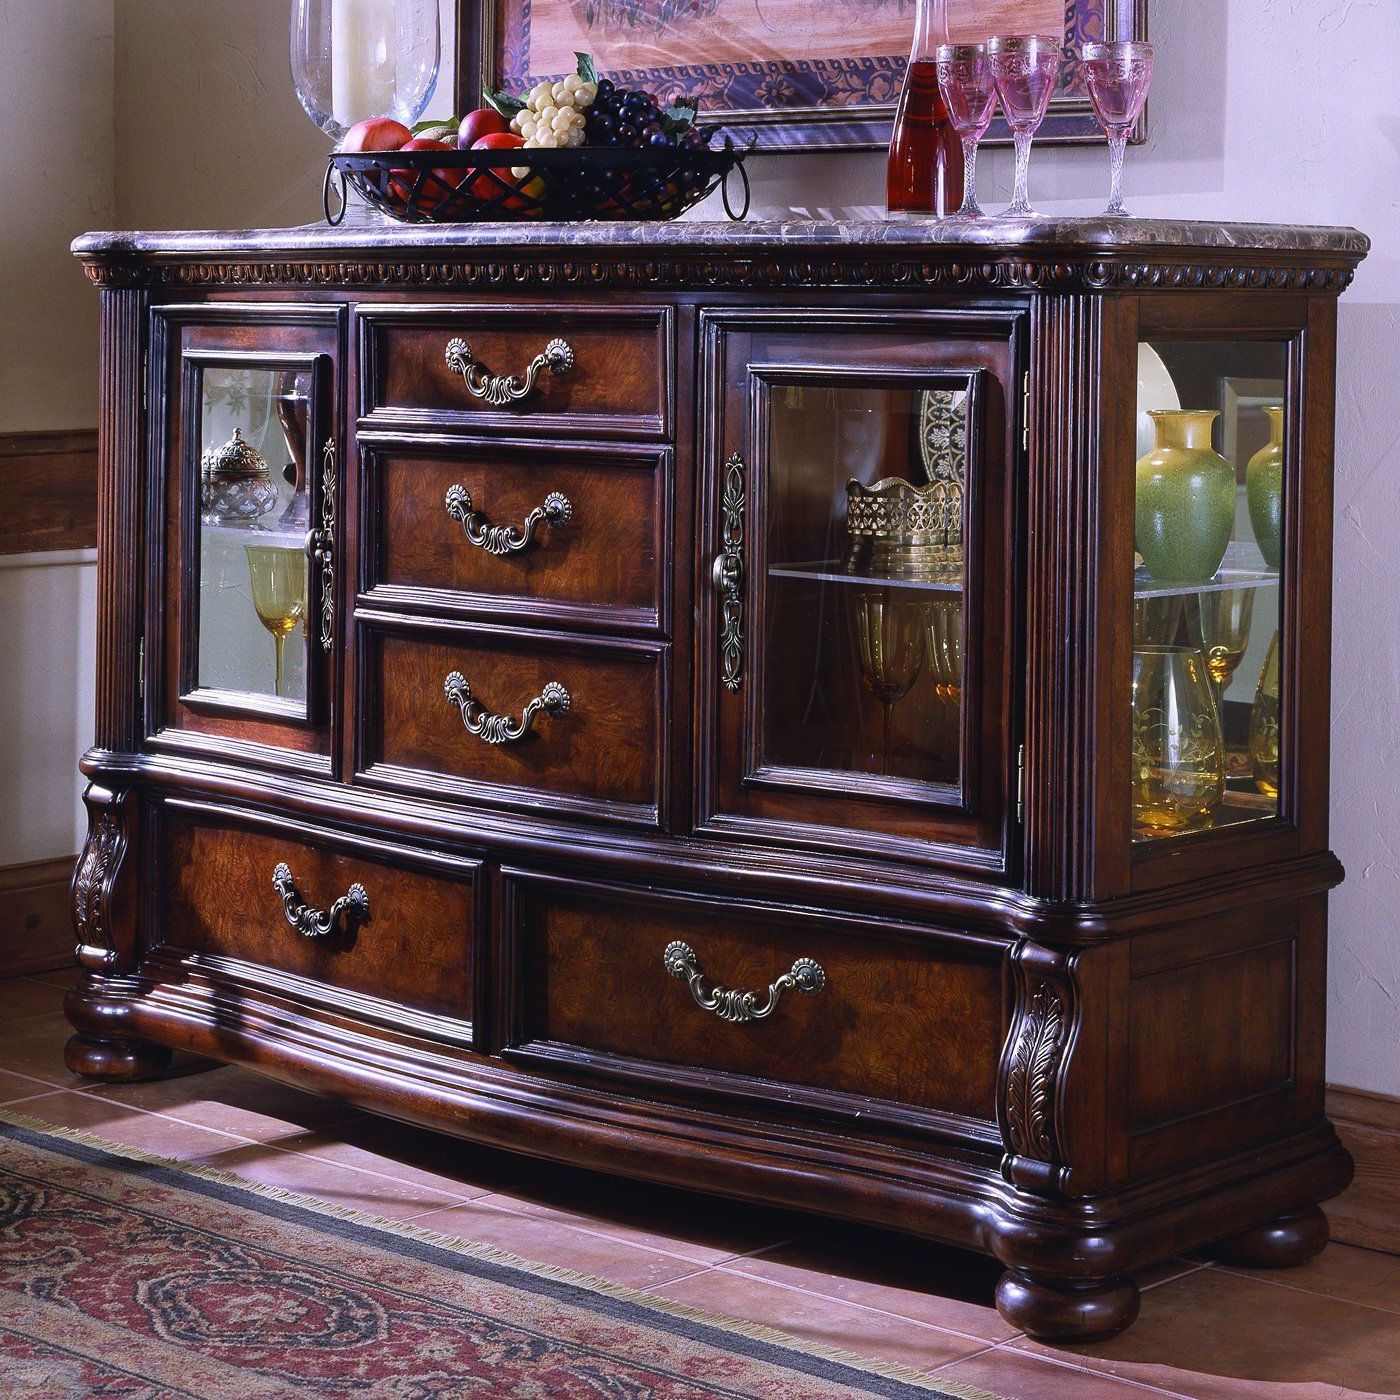 Samuel Lawrence 3530 146 San Marino Credenza Sideboard Pertaining To Weinberger Sideboards (Gallery 2 of 20)